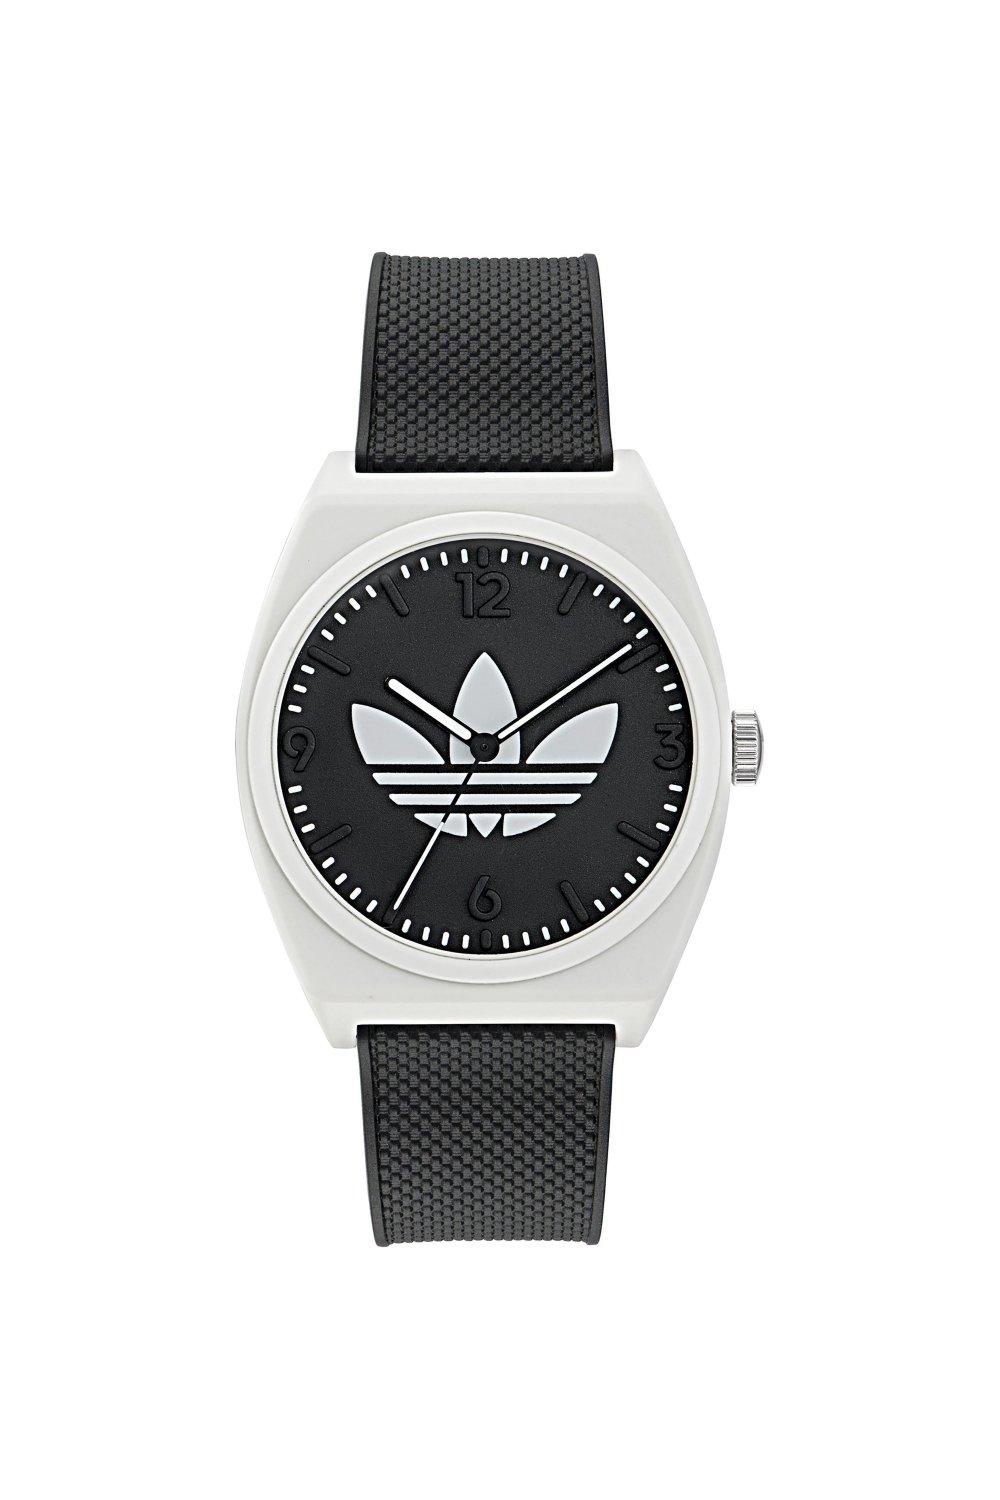 Quartz Watch Two Watches - Plastic/resin Aost23550 | Analogue Originals adidas | Fashion Project